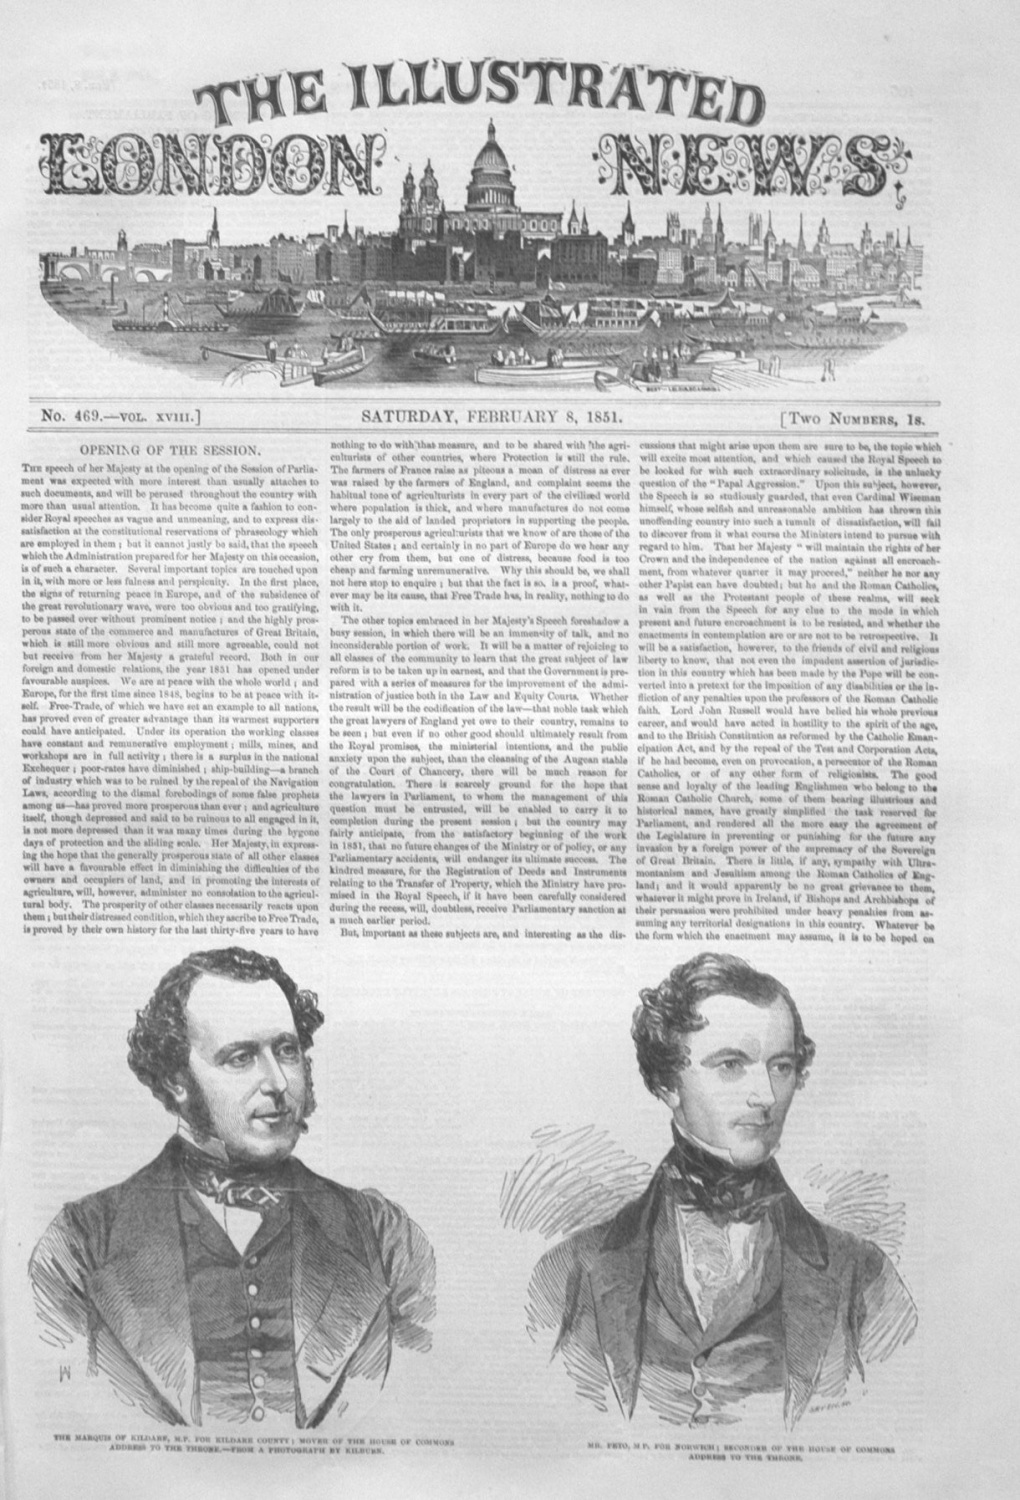 Illustrated London News February 8th 1851.